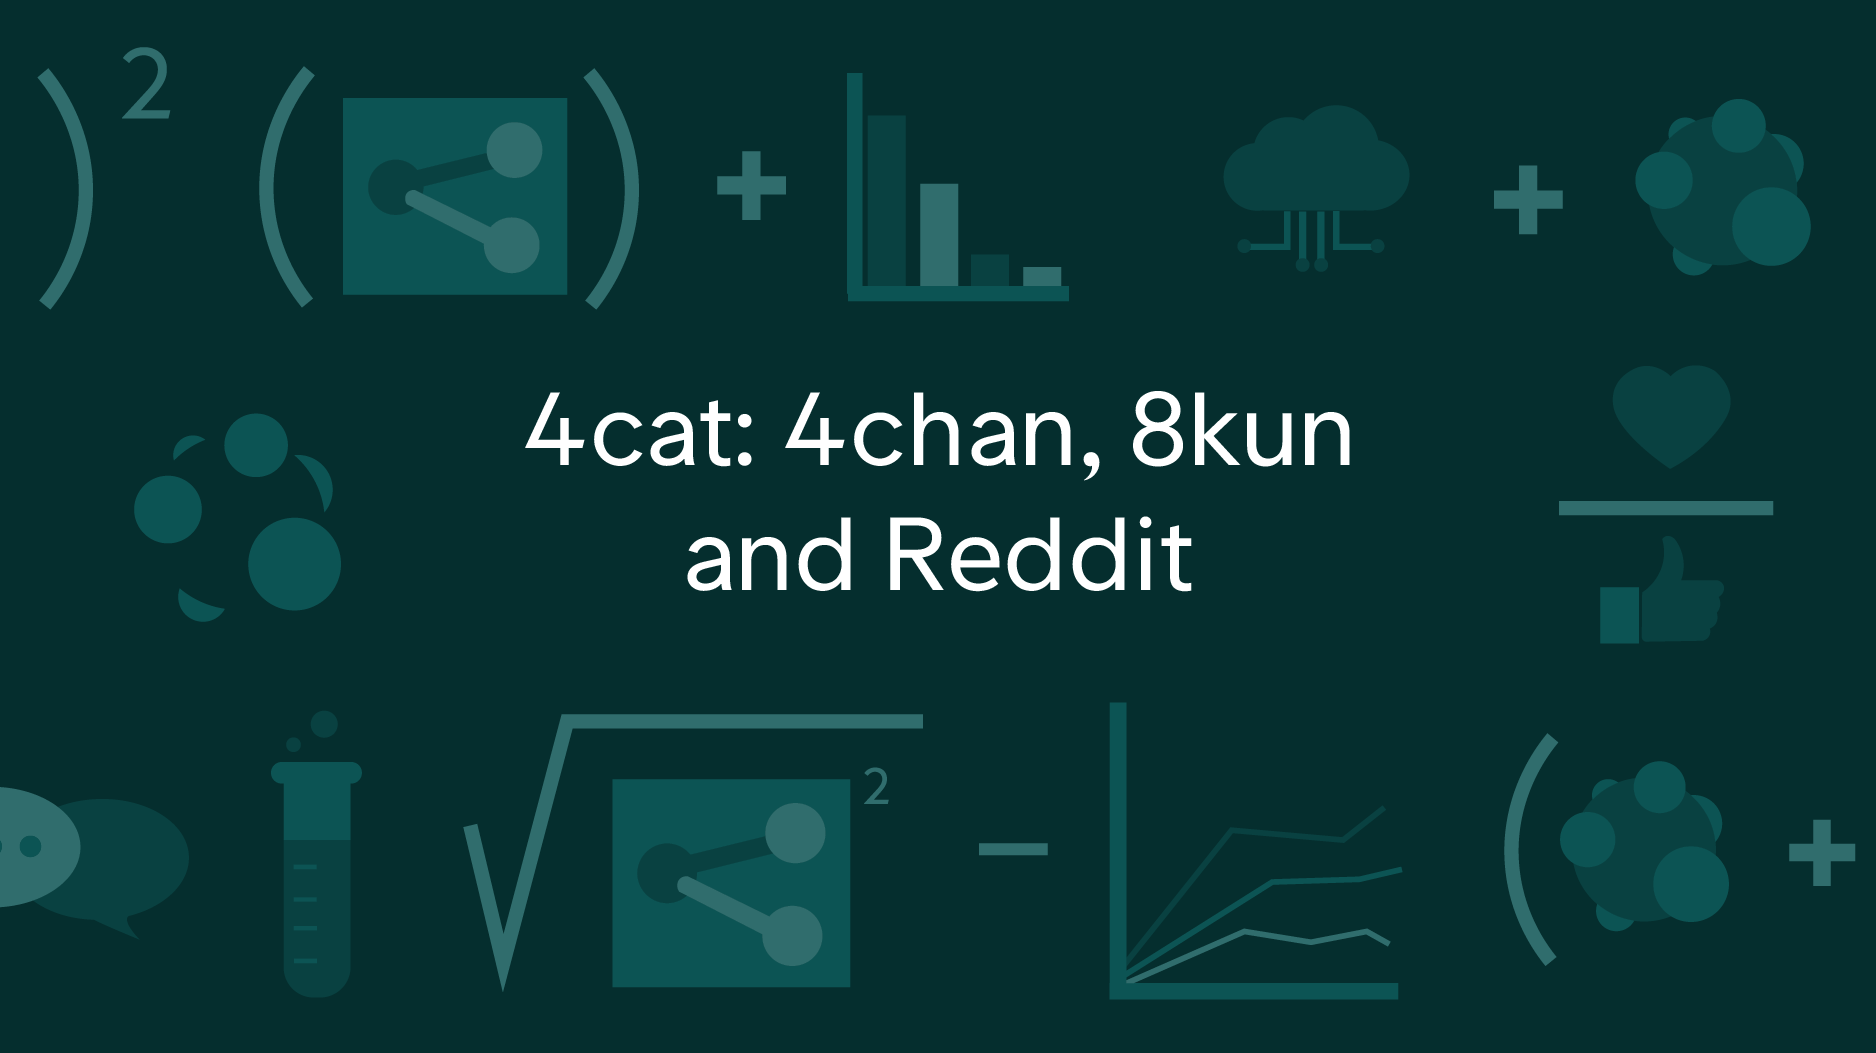 8chan, Website Known for Shooting Associations, Relaunched As